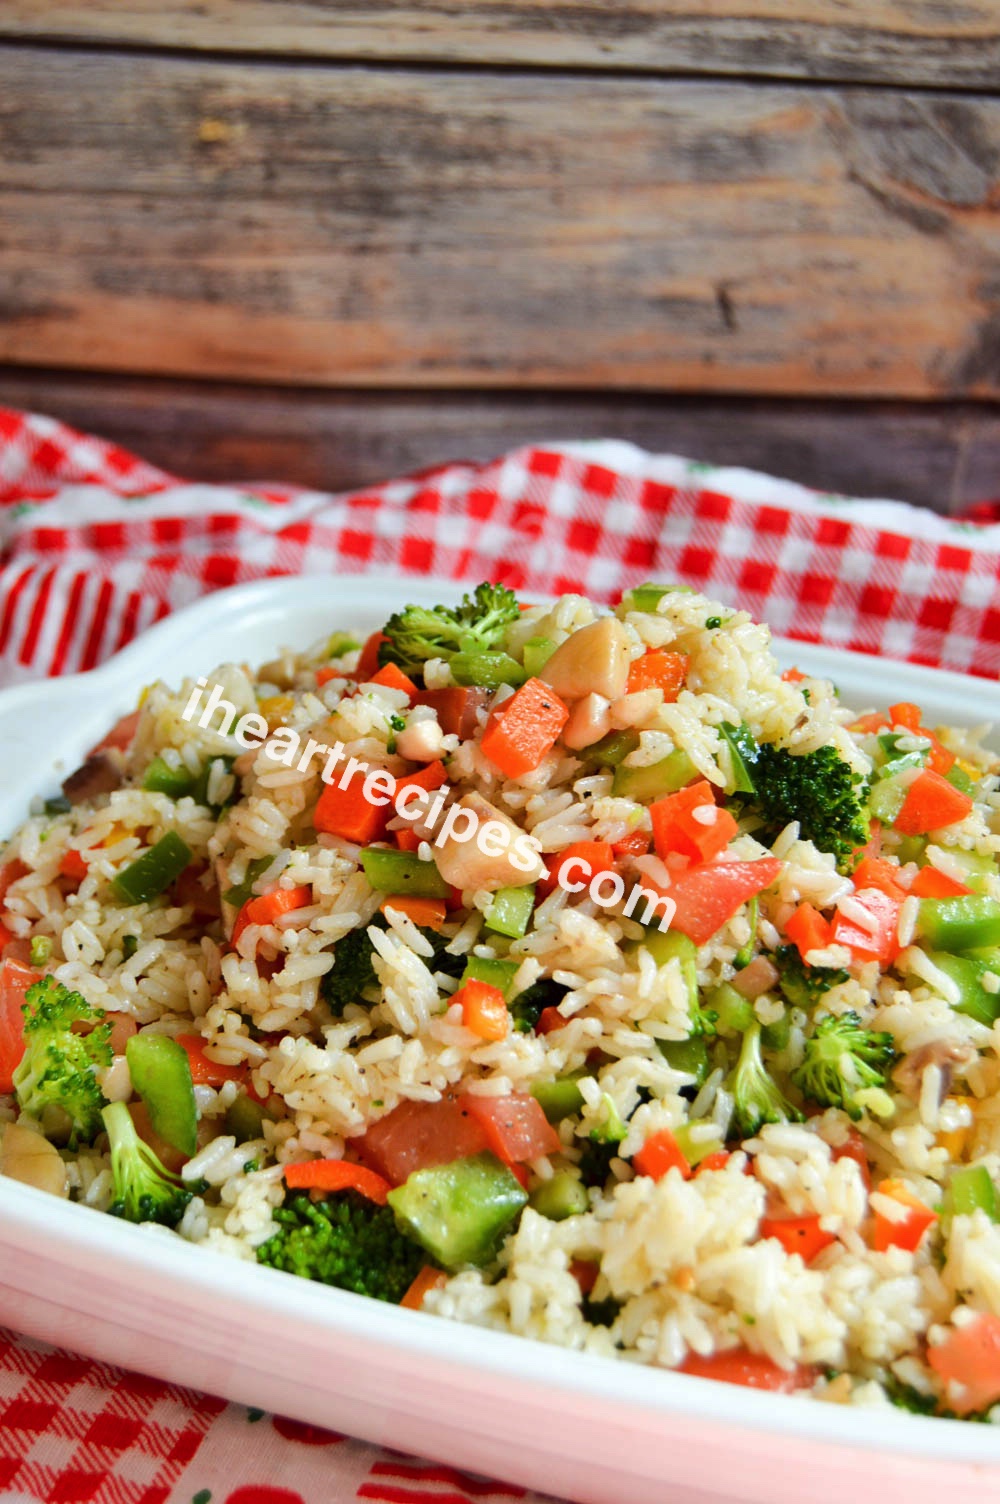 A casserole dish filled with rice salad sits on a red and white checkered tablecloth. The rice salad is a mixture of white rice and broccoli, diced bell peppers, celery, and carrots.